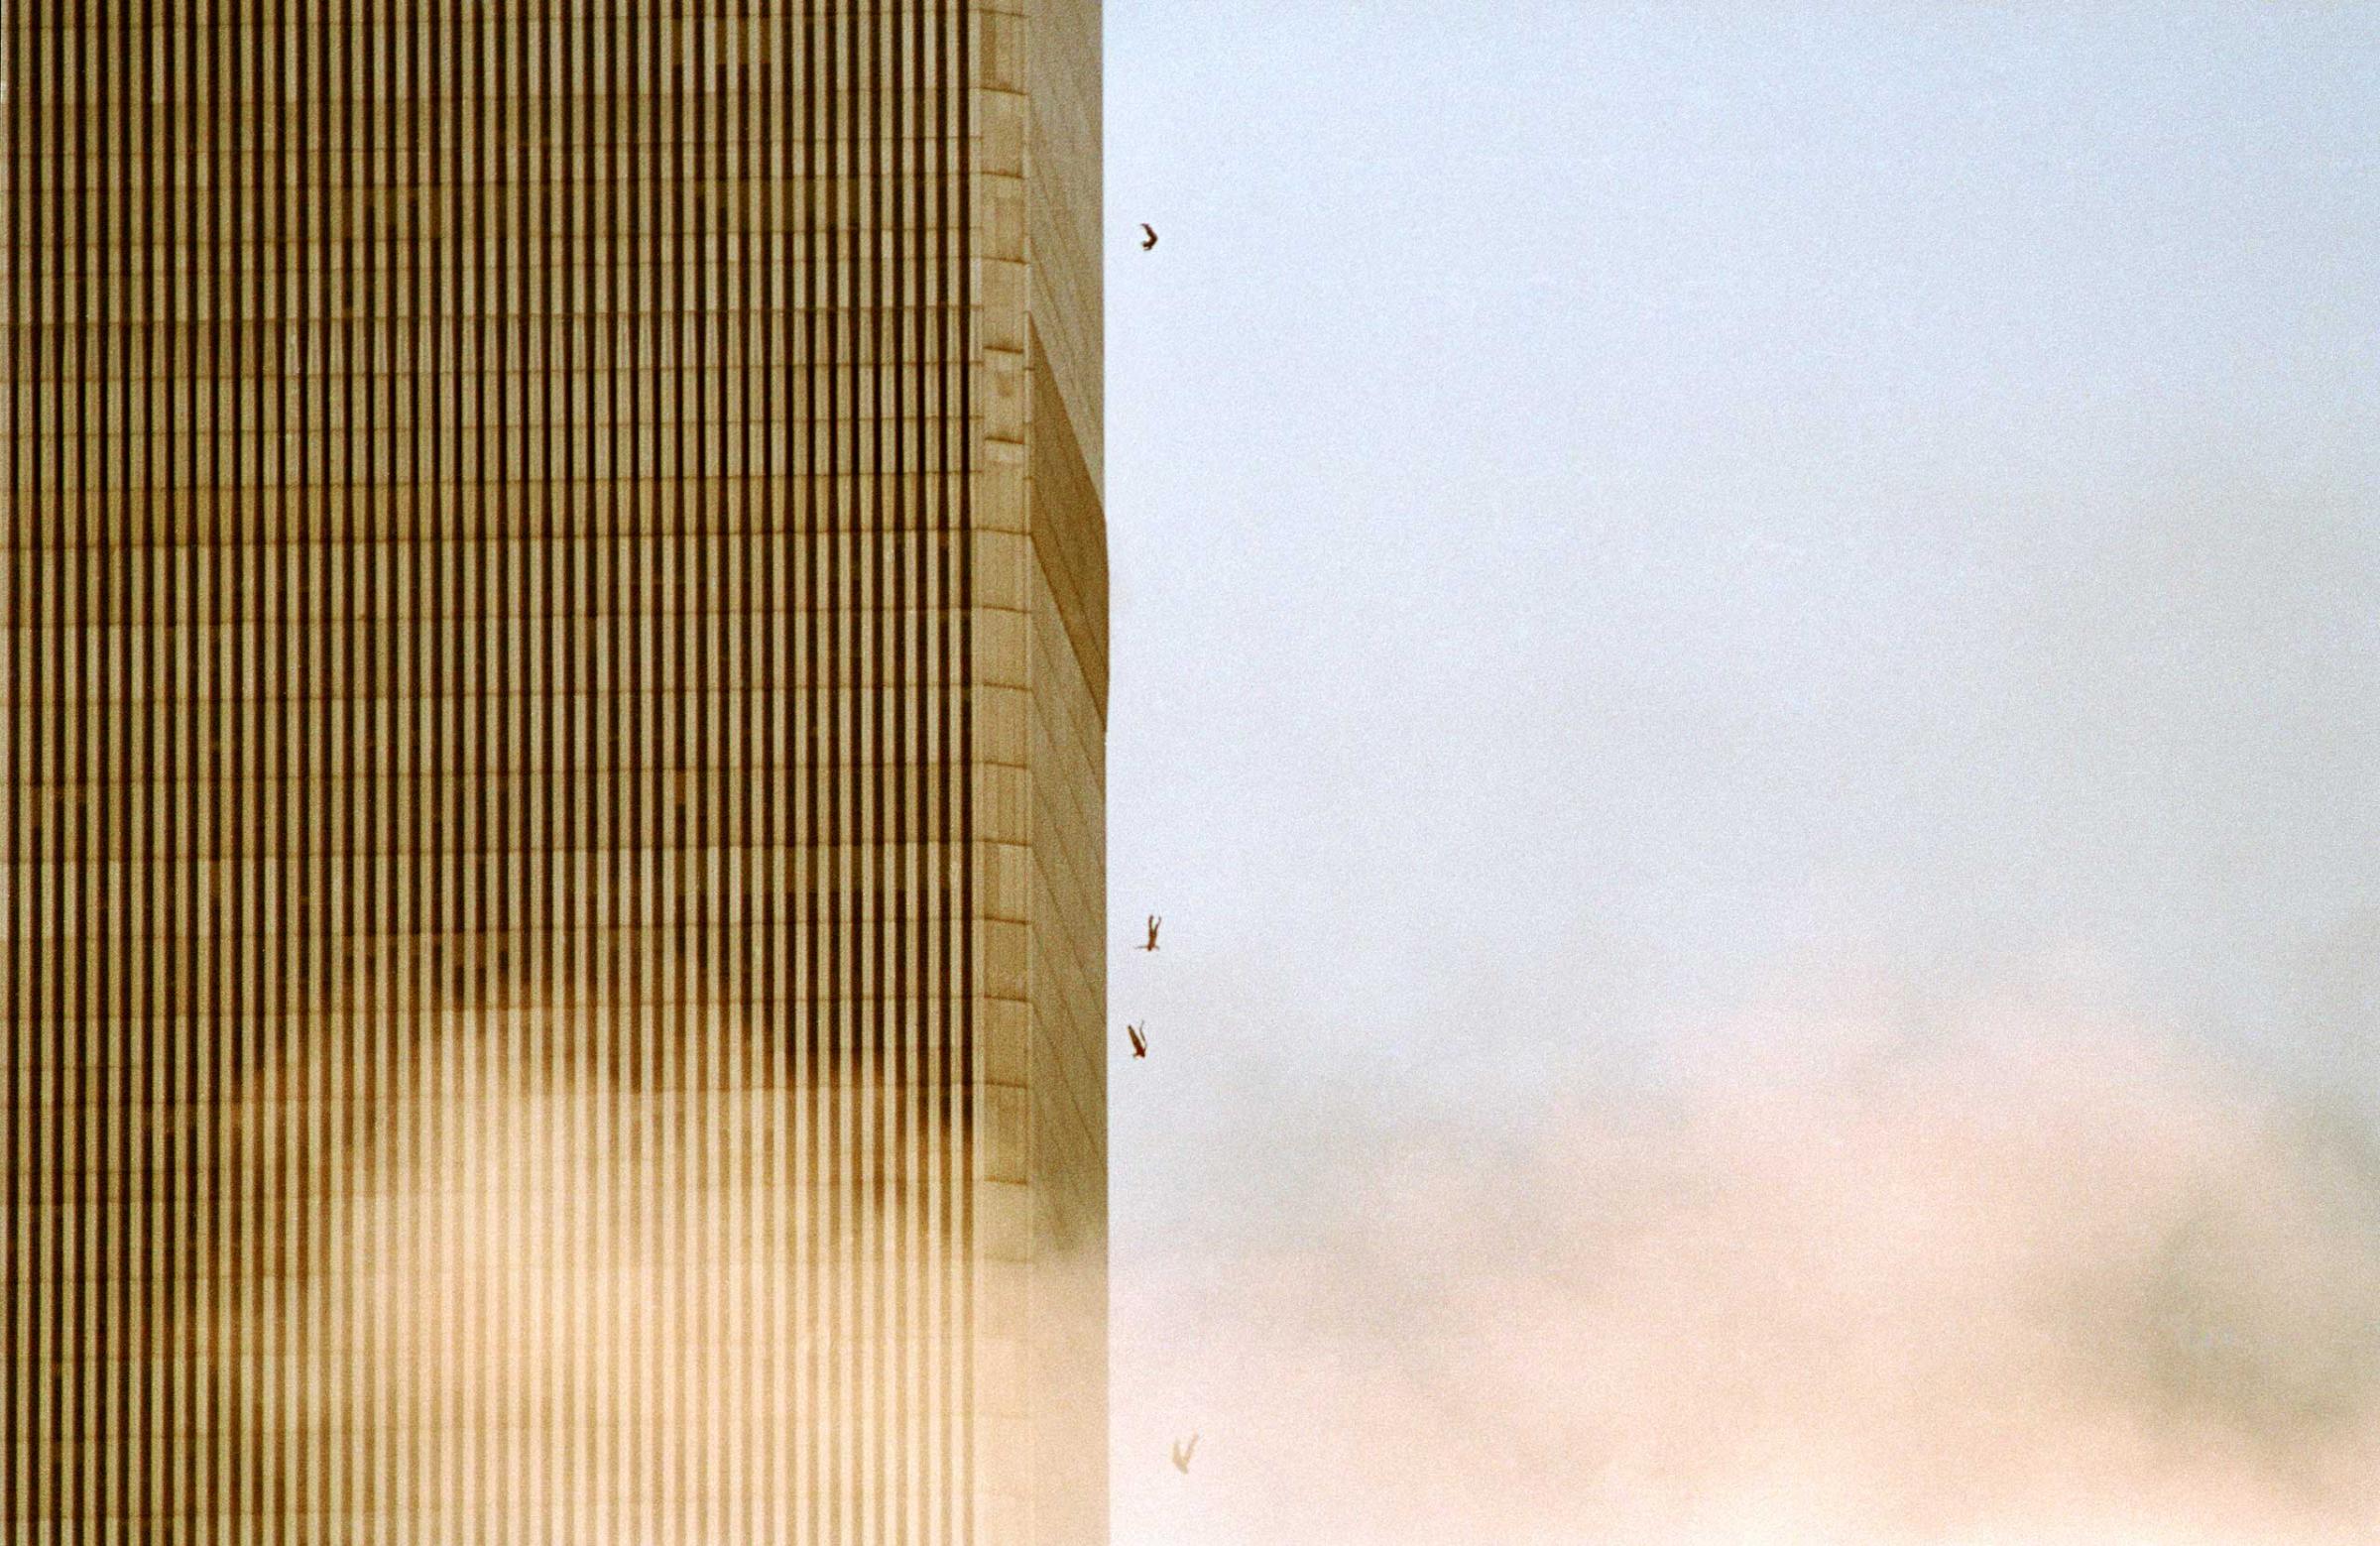 World Trade Center Attack - Aftermath - WTC